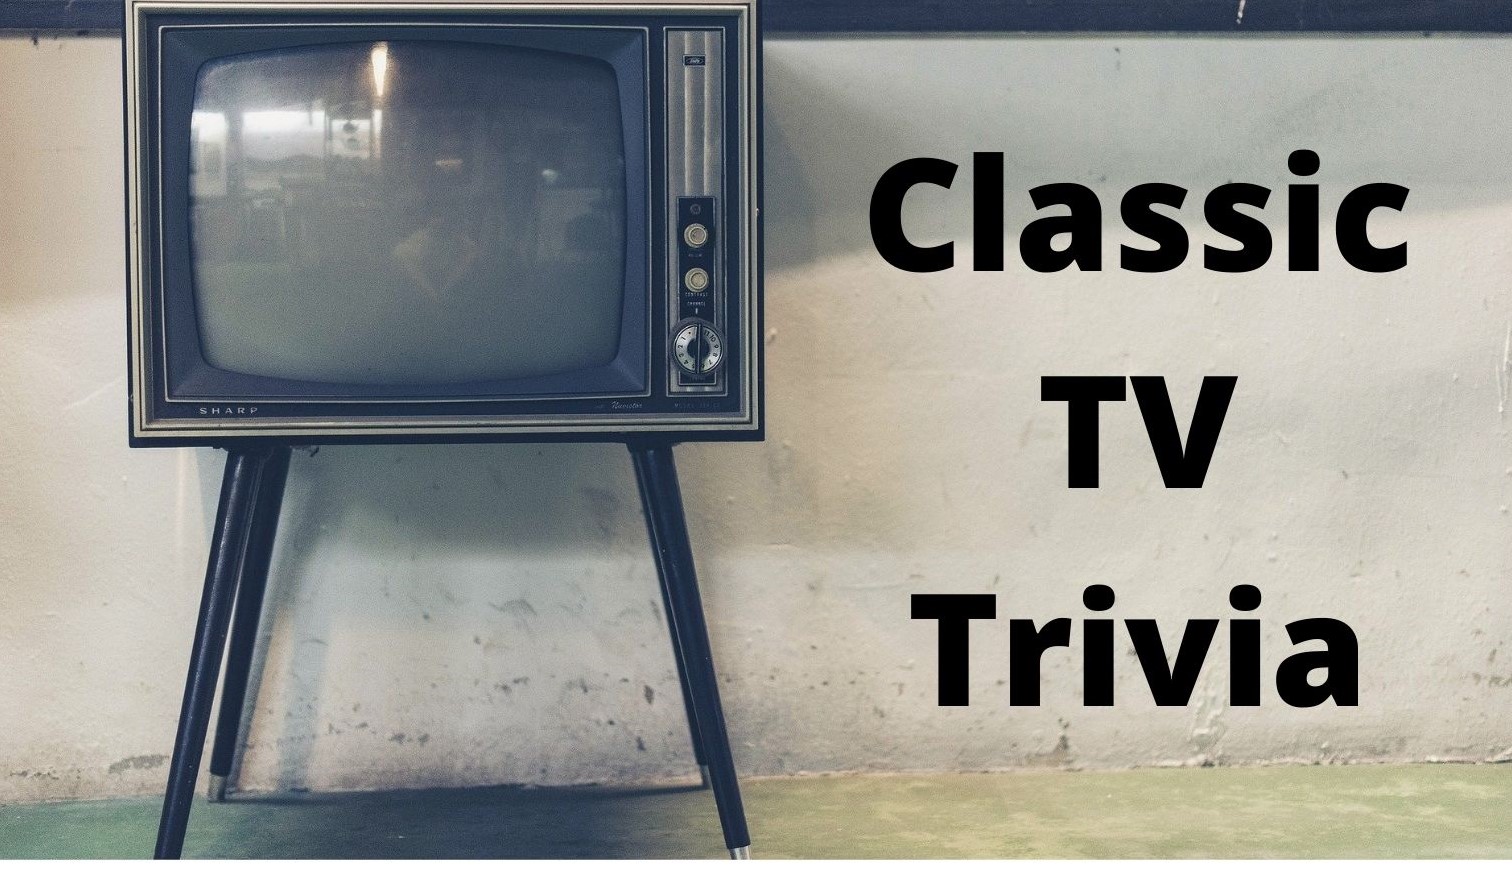 Old style TV with Classic TV Trivia 